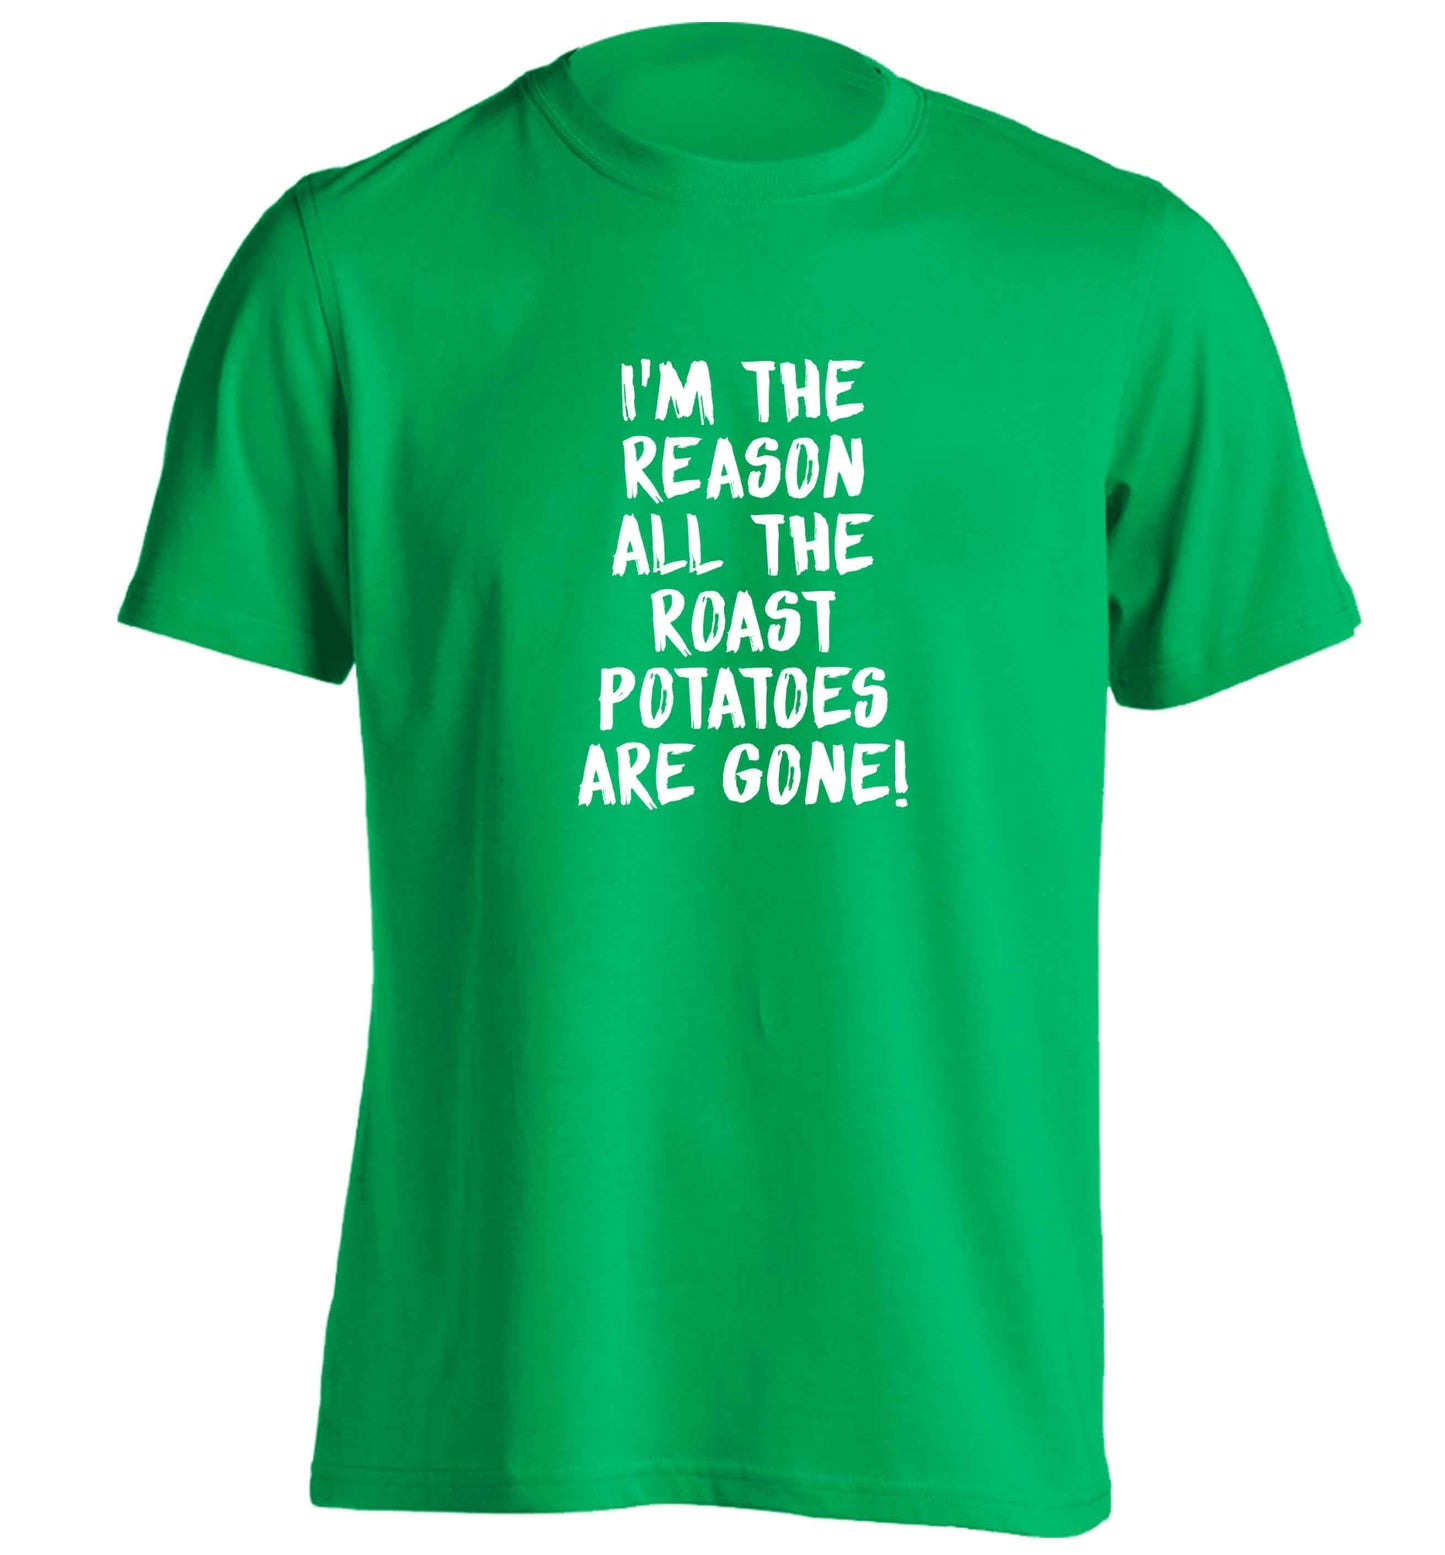 I'm the reason all the roast potatoes are gone adults unisex green Tshirt 2XL